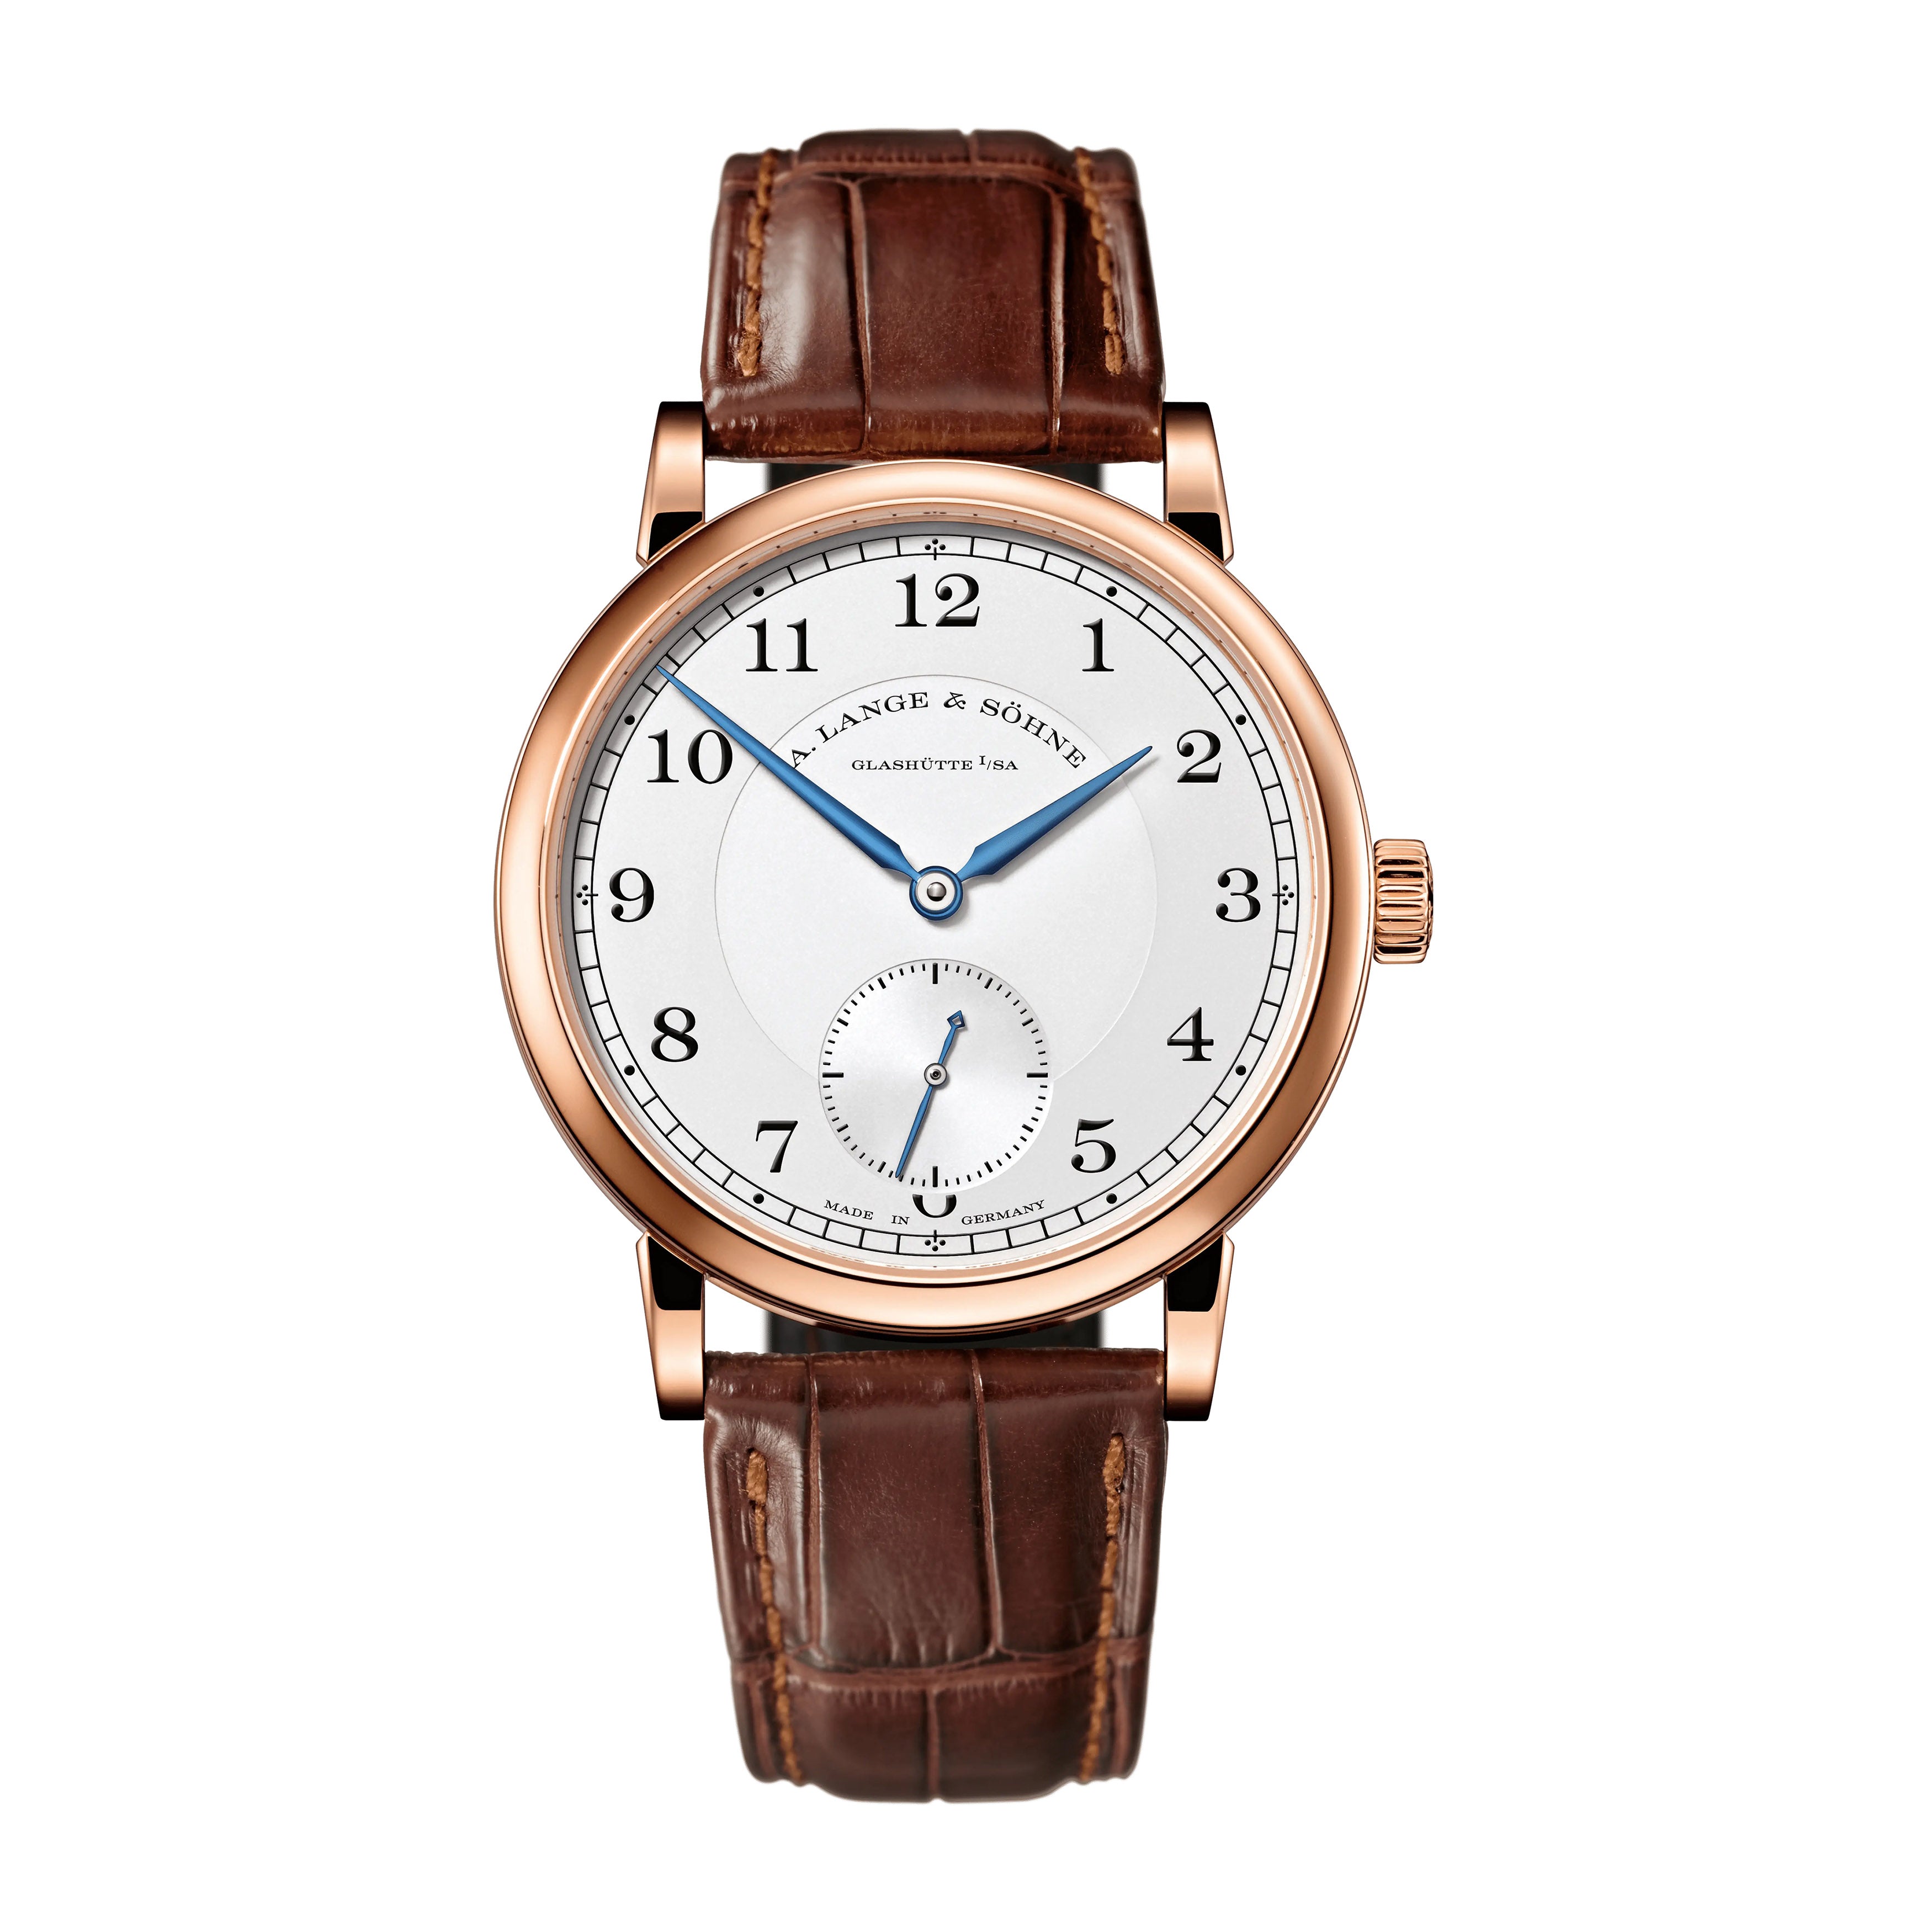 A.Lange & Sohne 1815 Watch, 39mm Silver Dial, 235.032